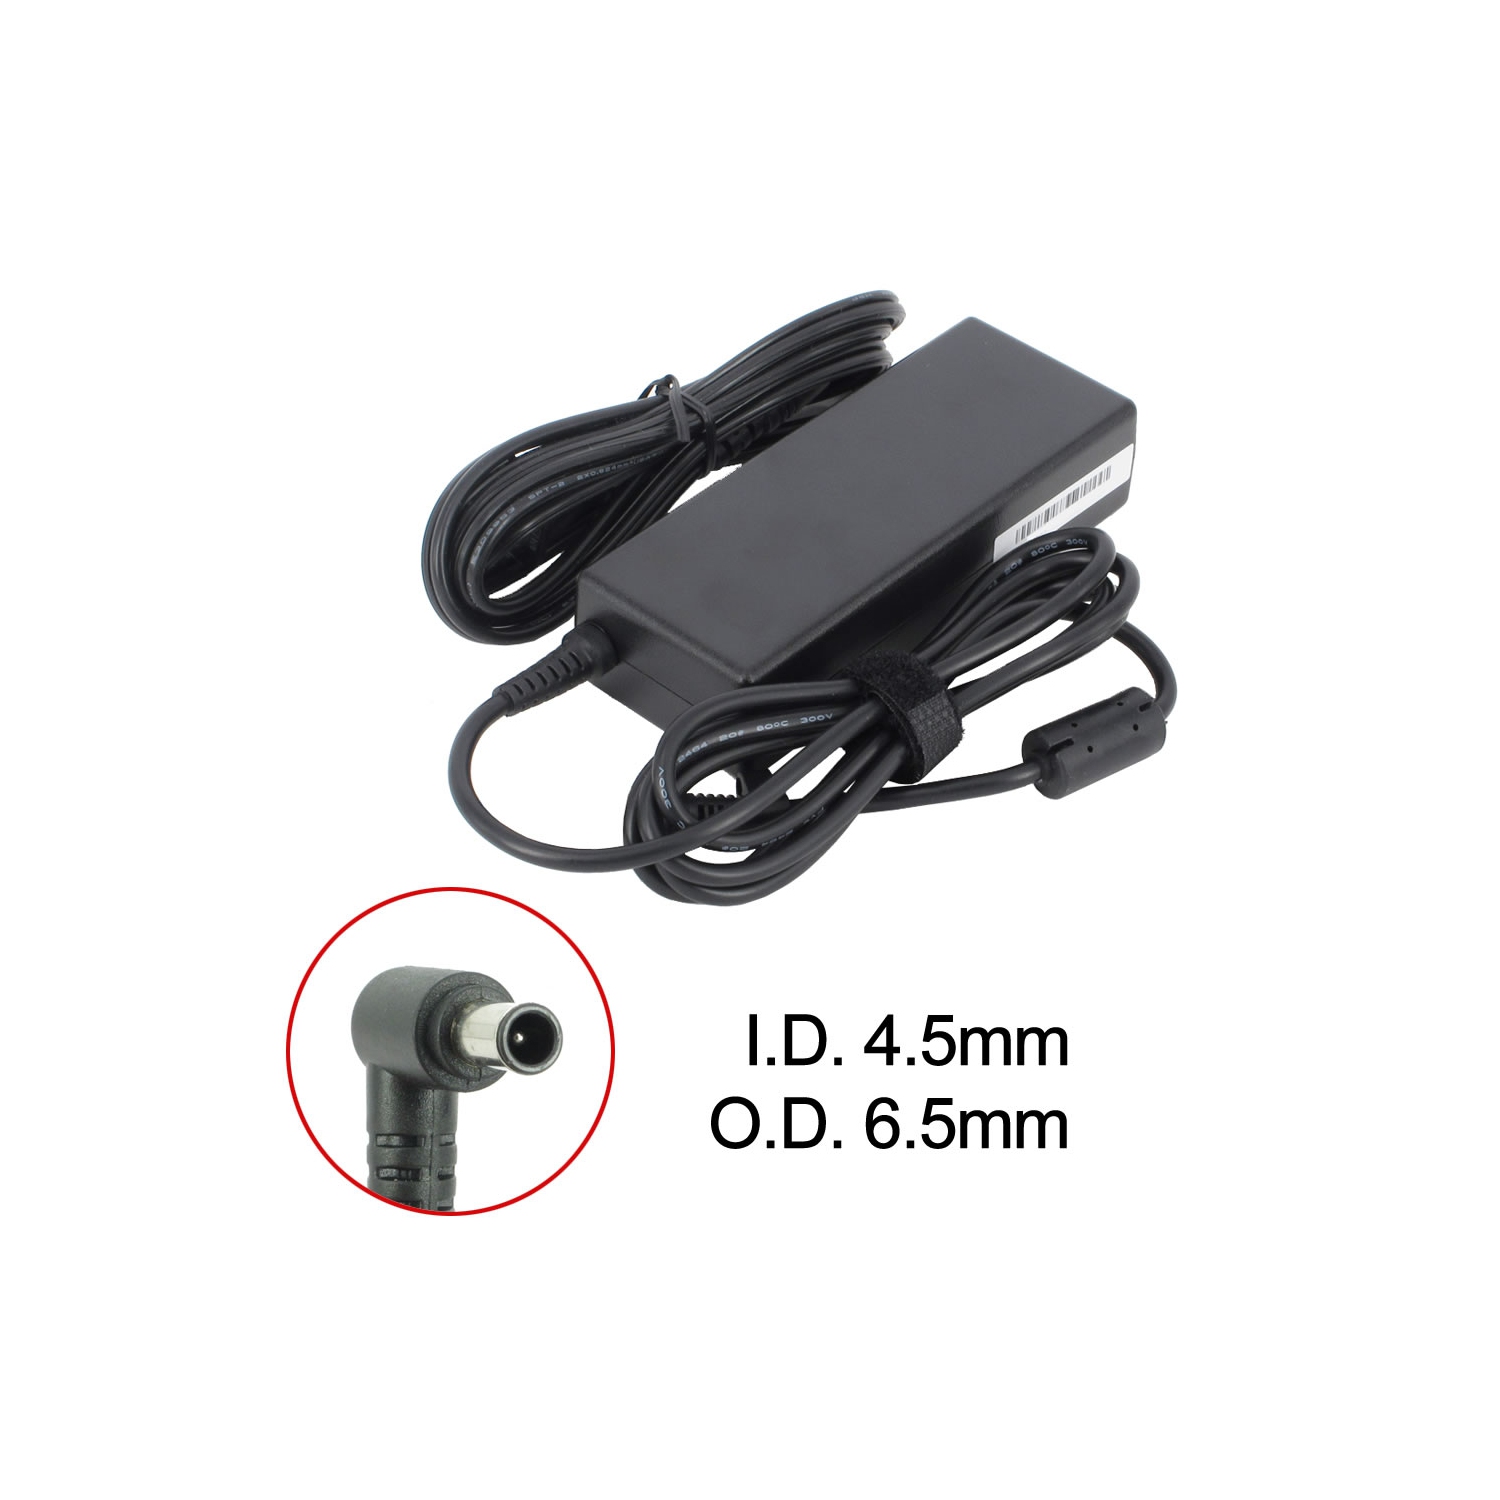 Brand New Laptop AC Adapter for Sony VAIO VGN-NS21E/S, PCGA-AC19V11, VGP-AC19V10, VGP-AC19V21, VGP-AC19V31, VGP-AC19V67